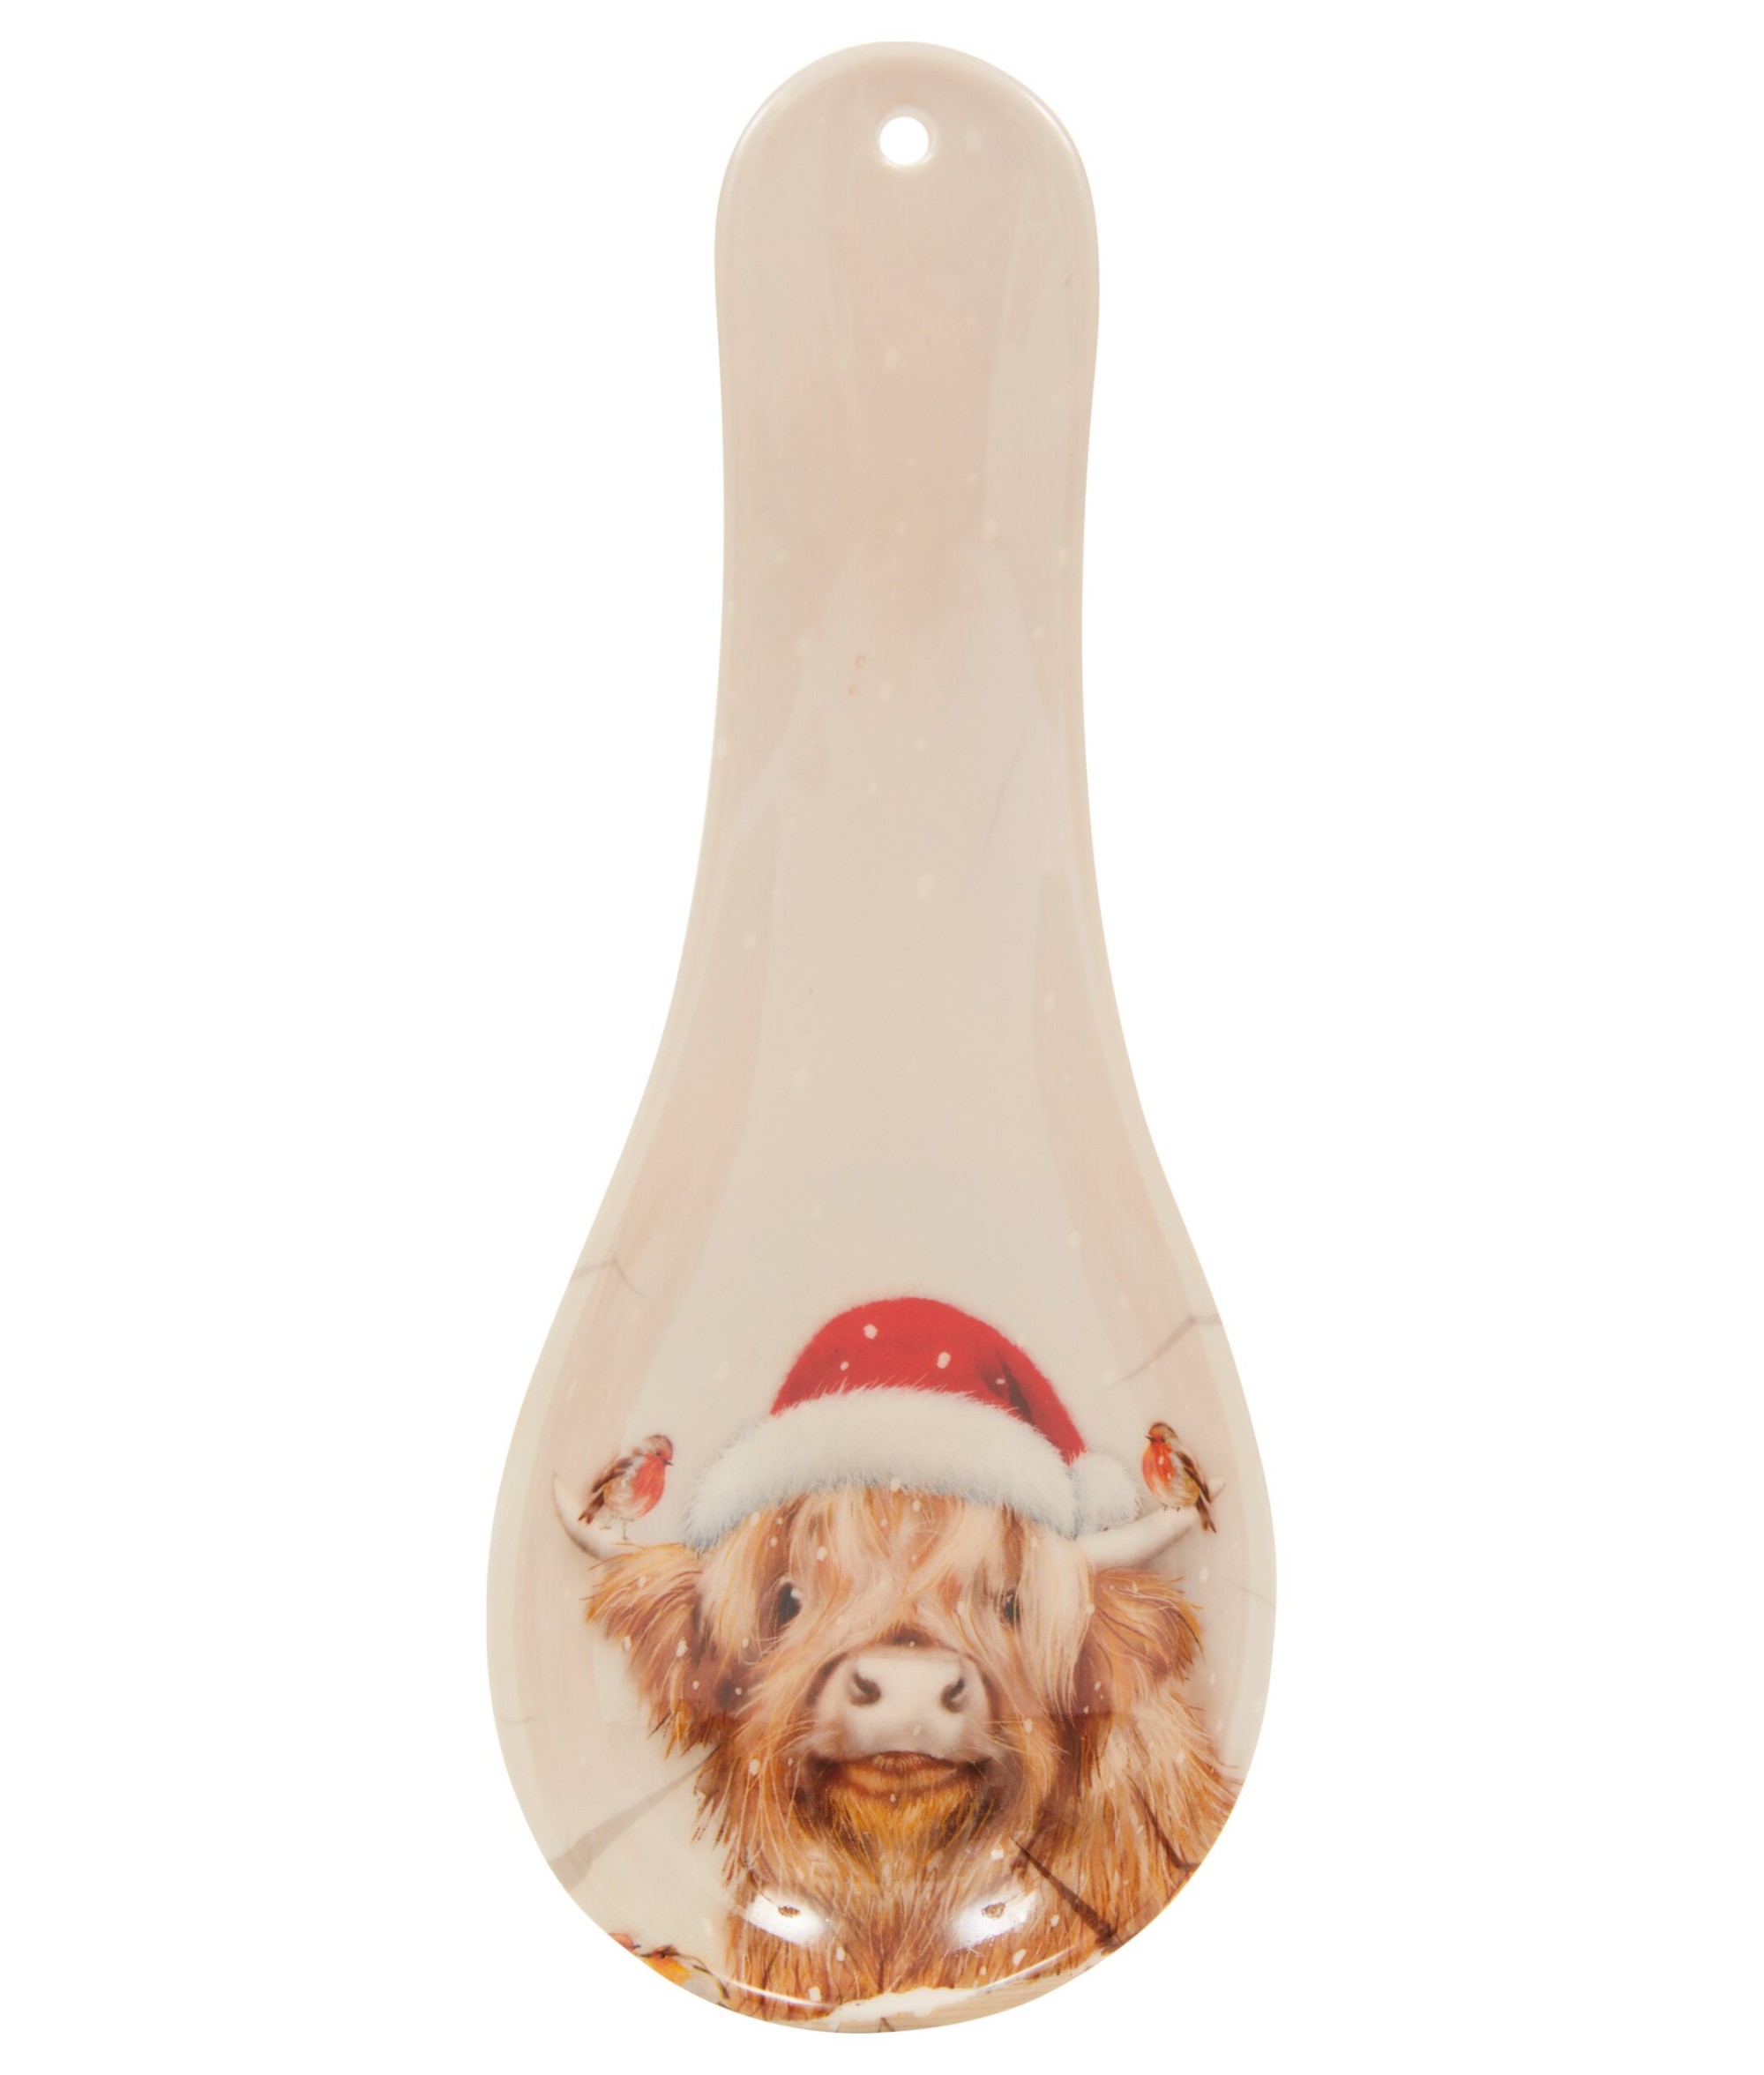 Finlay the Highland Cow Spoon Rest